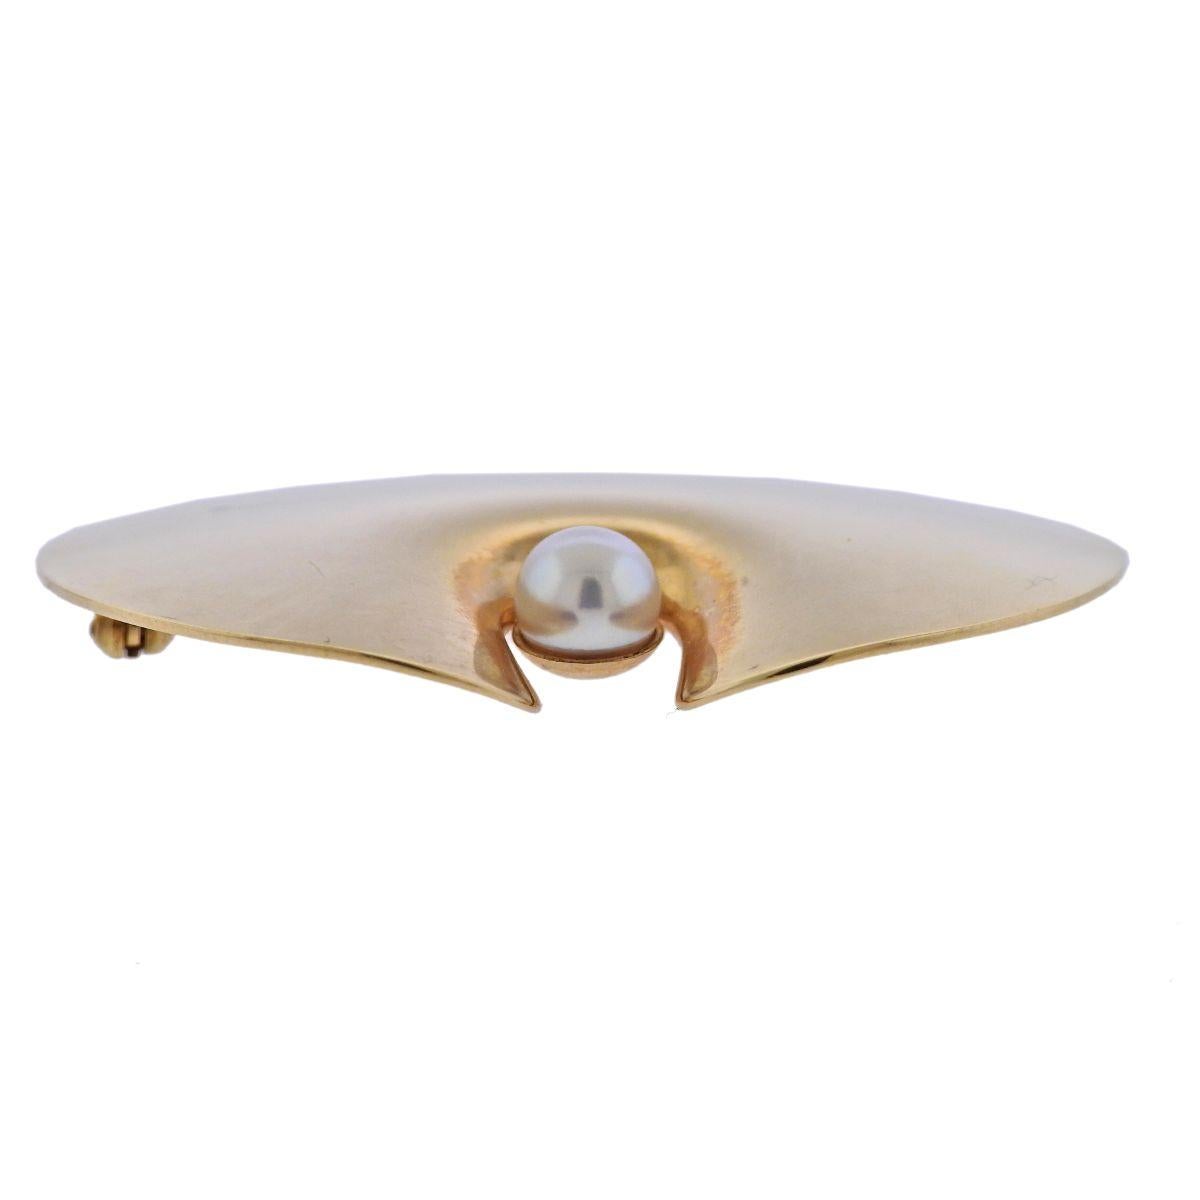 18k yellow gold brooch by Georg Jensen, No. 1351, with 6.3mm pearl. Brooch is 40mm x 45mm. Weight - 14.6 grams. Marked: Georg Jensen mark, 750, 1351. 